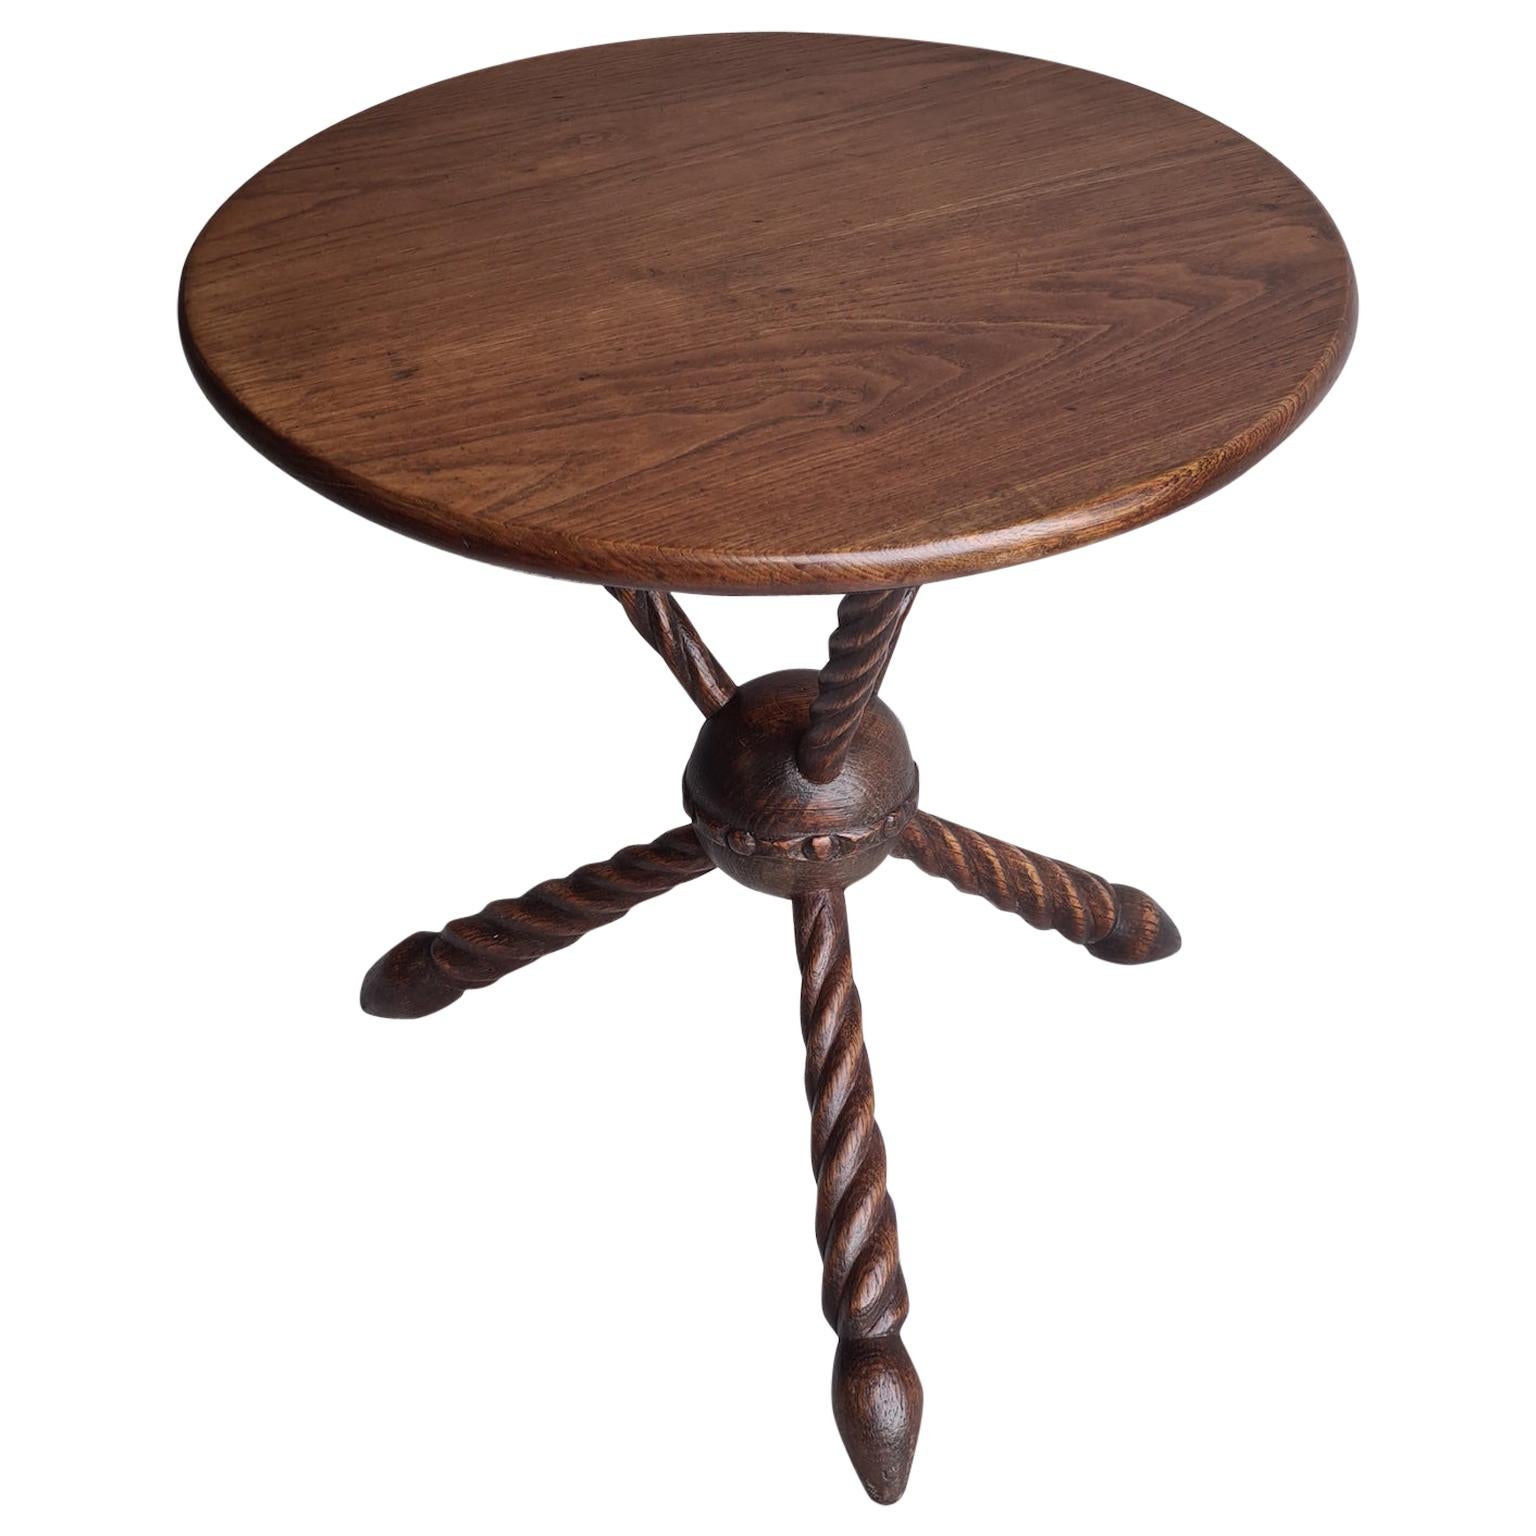 19th Century Gypsy Table, Occasional / Side Table, Tripod Legs, circa 1860-1870 For Sale